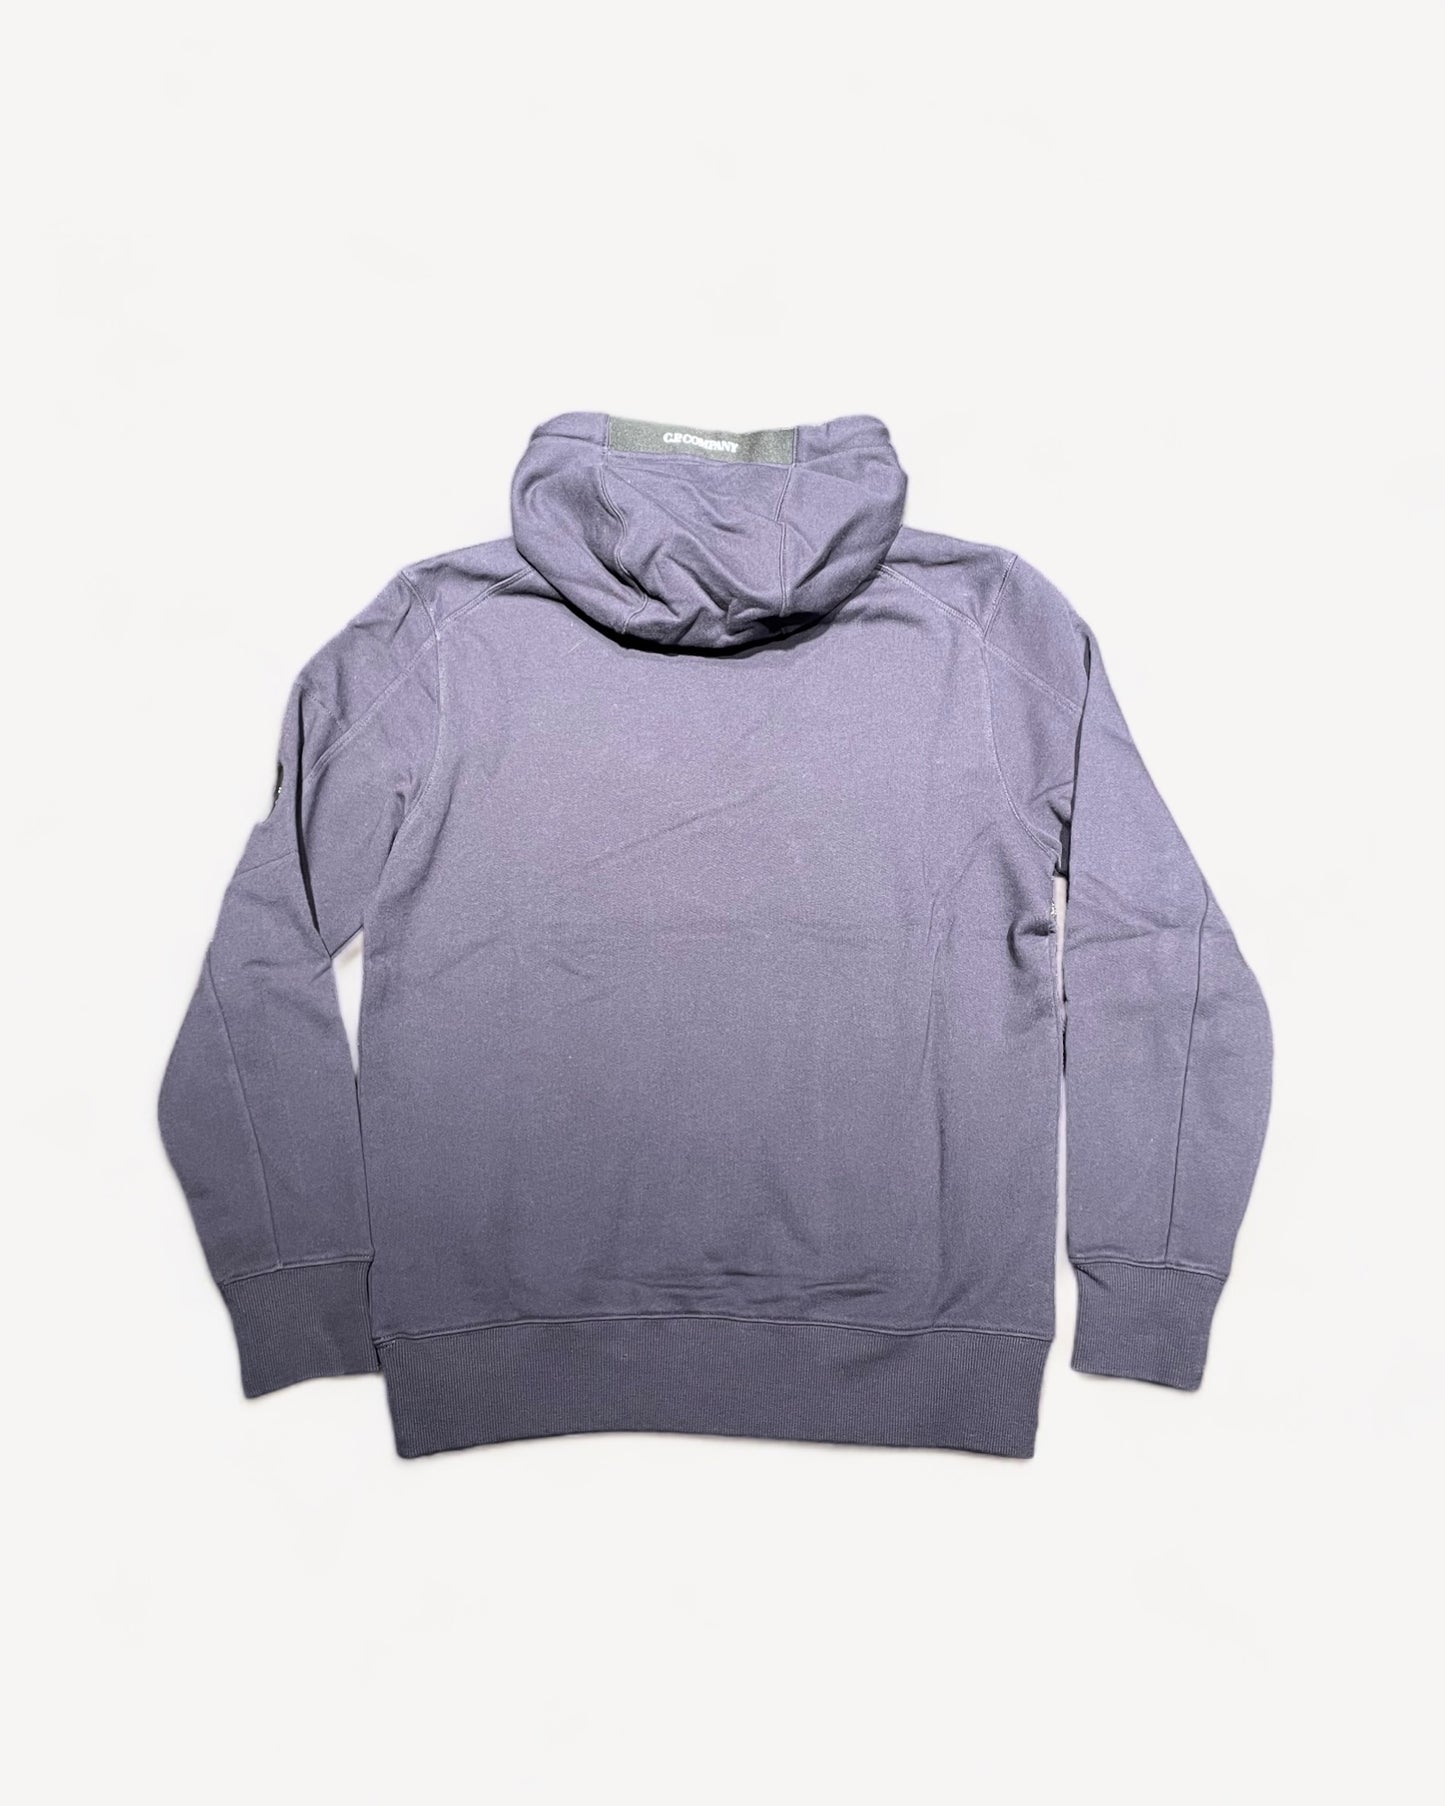 CP COMPANY HOODIE BLUE NEW! (S-XL)